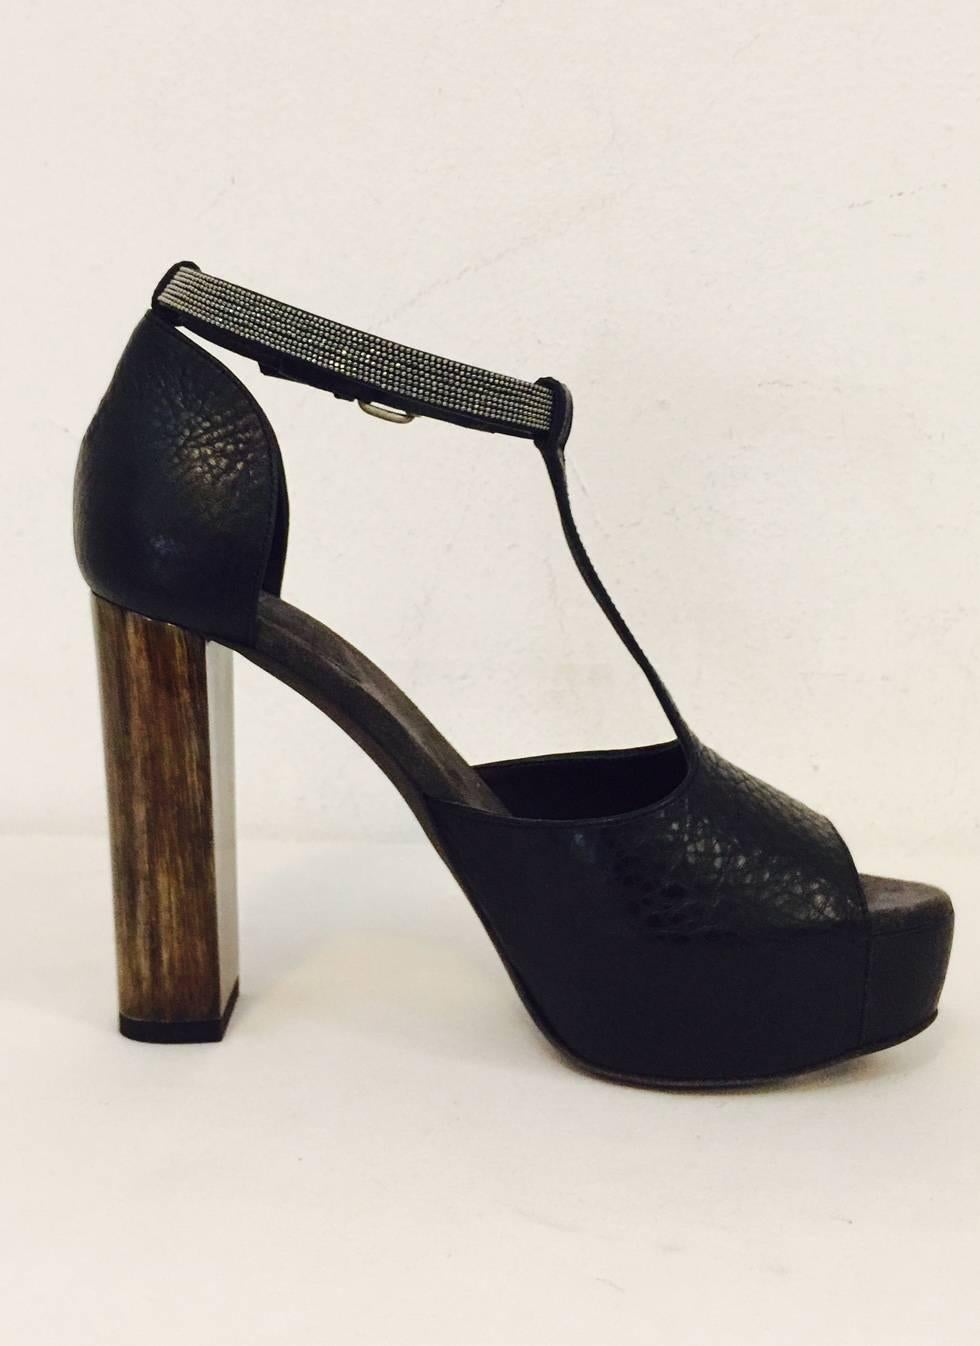 Black leather Brunello Cucinelli platform pumps with peep-toes. Monili covered ankle straps and buckle closure at side.  These platform sandals are very comfortable and with the Monili chain accent on the ankle strap, makes it oh so glamorous. 